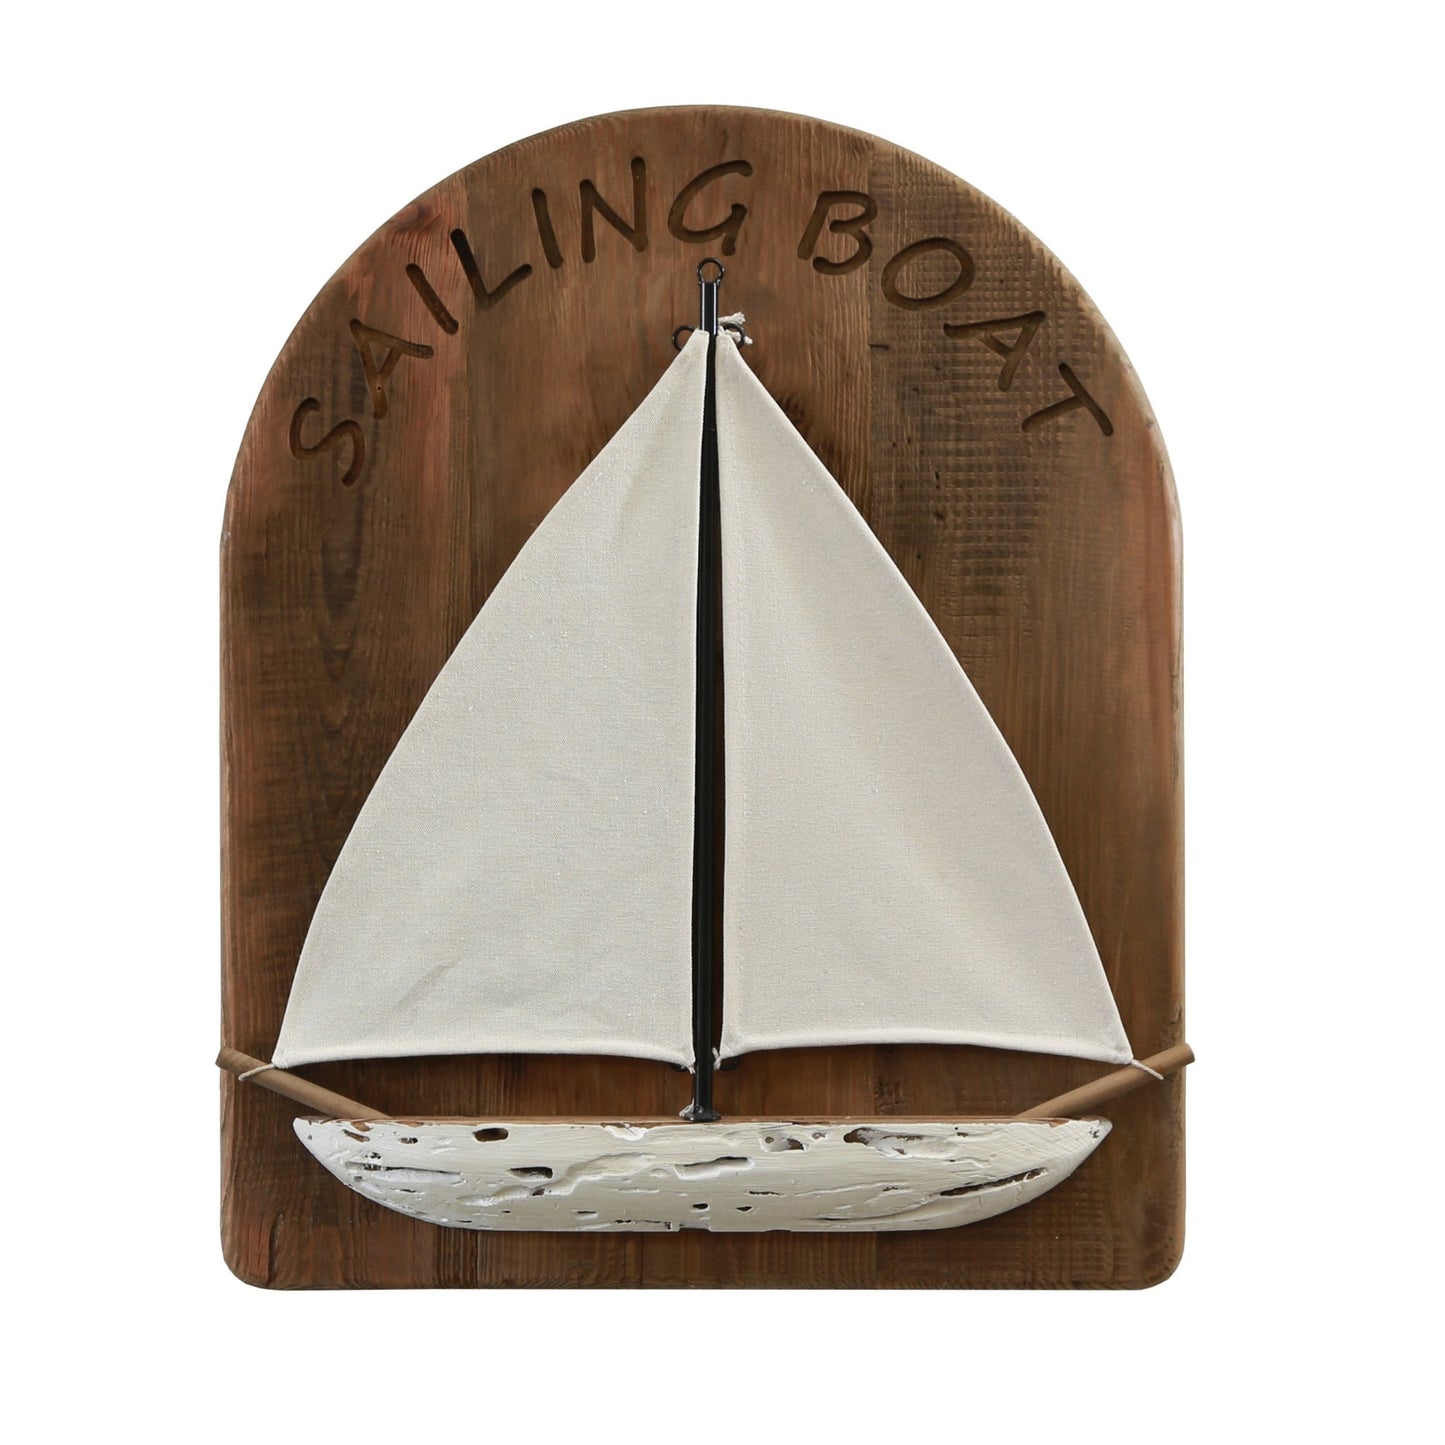 Reclaimed Wooden Sailing Boat Wall Decor, White, 30% Off